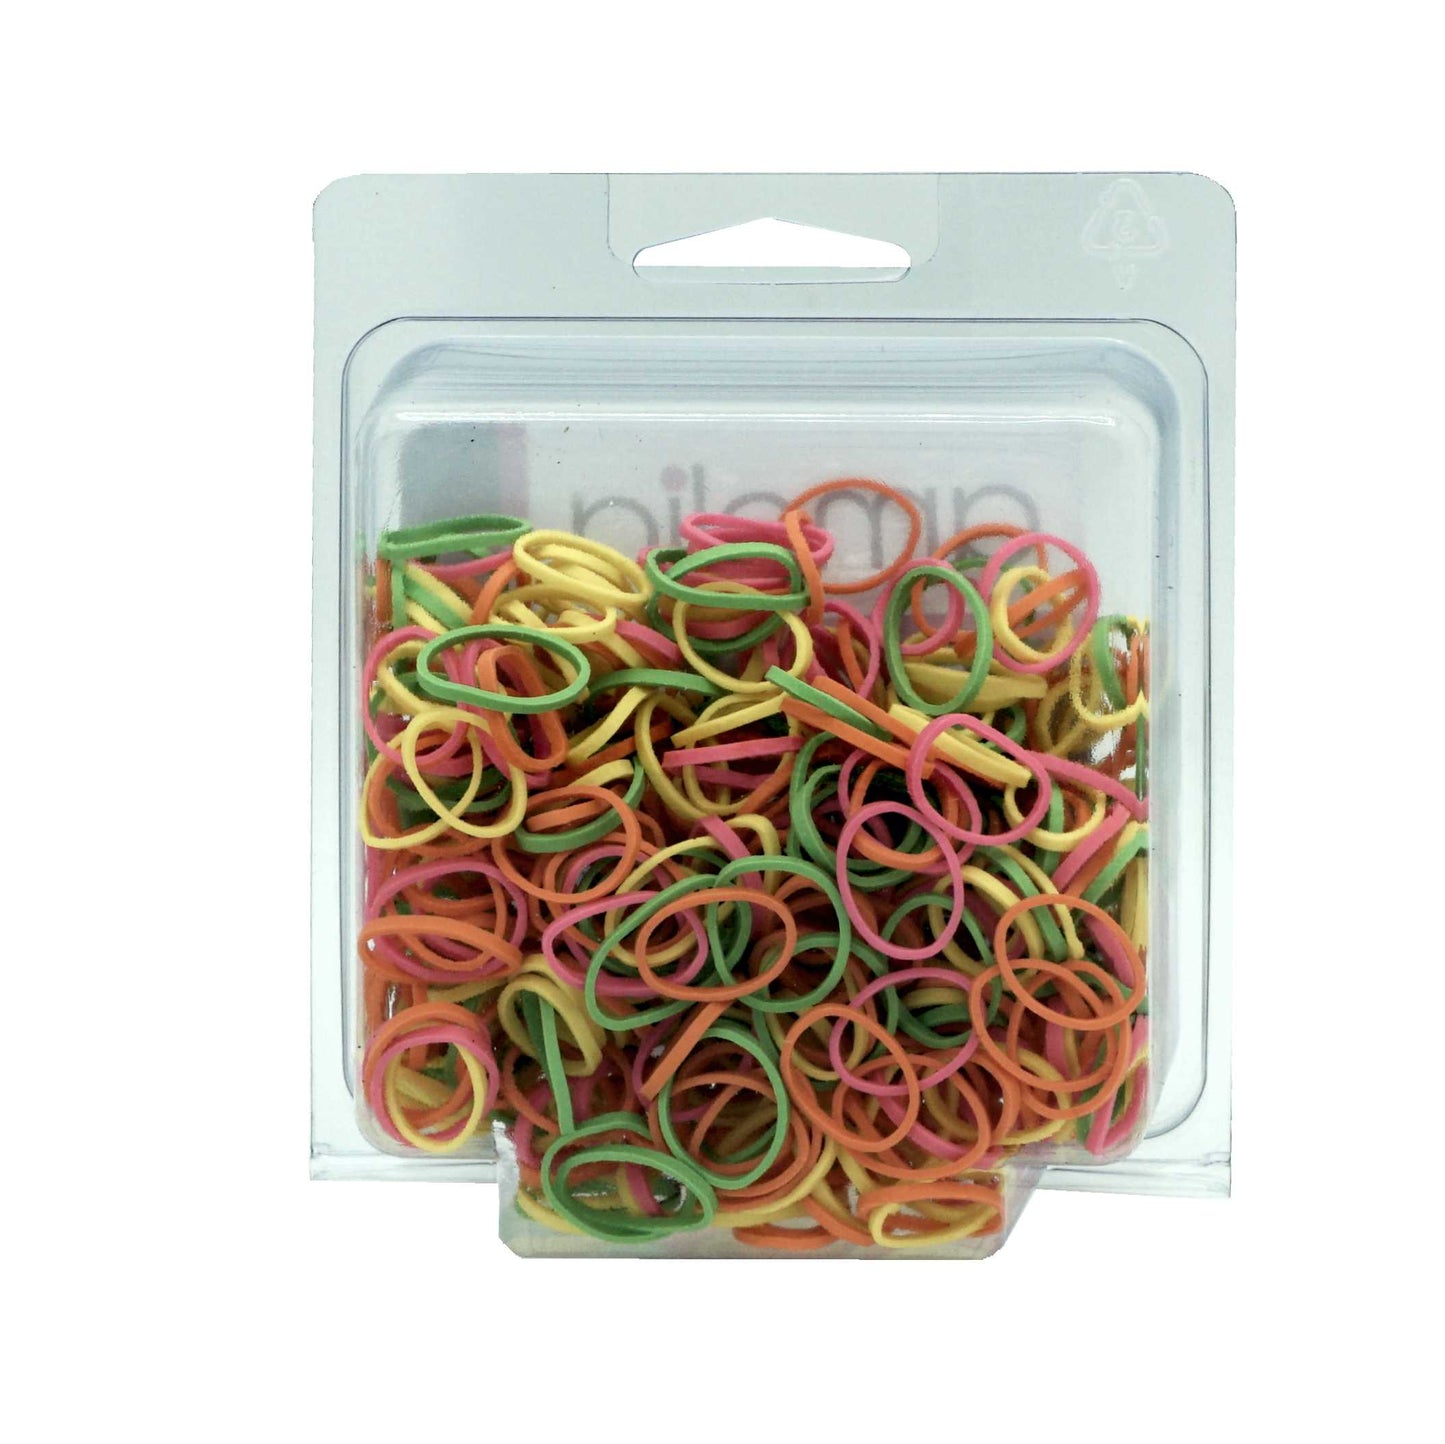 Amelia Beauty | 1/2in, Brights Neon Mix, Elastic Rubber Band Pony Tail Holders | Made in USA, Ideal for Ponytails, Braids, Twists, Dreadlocks, Styling Accessories for Women, Men and Girls | 500 Pack